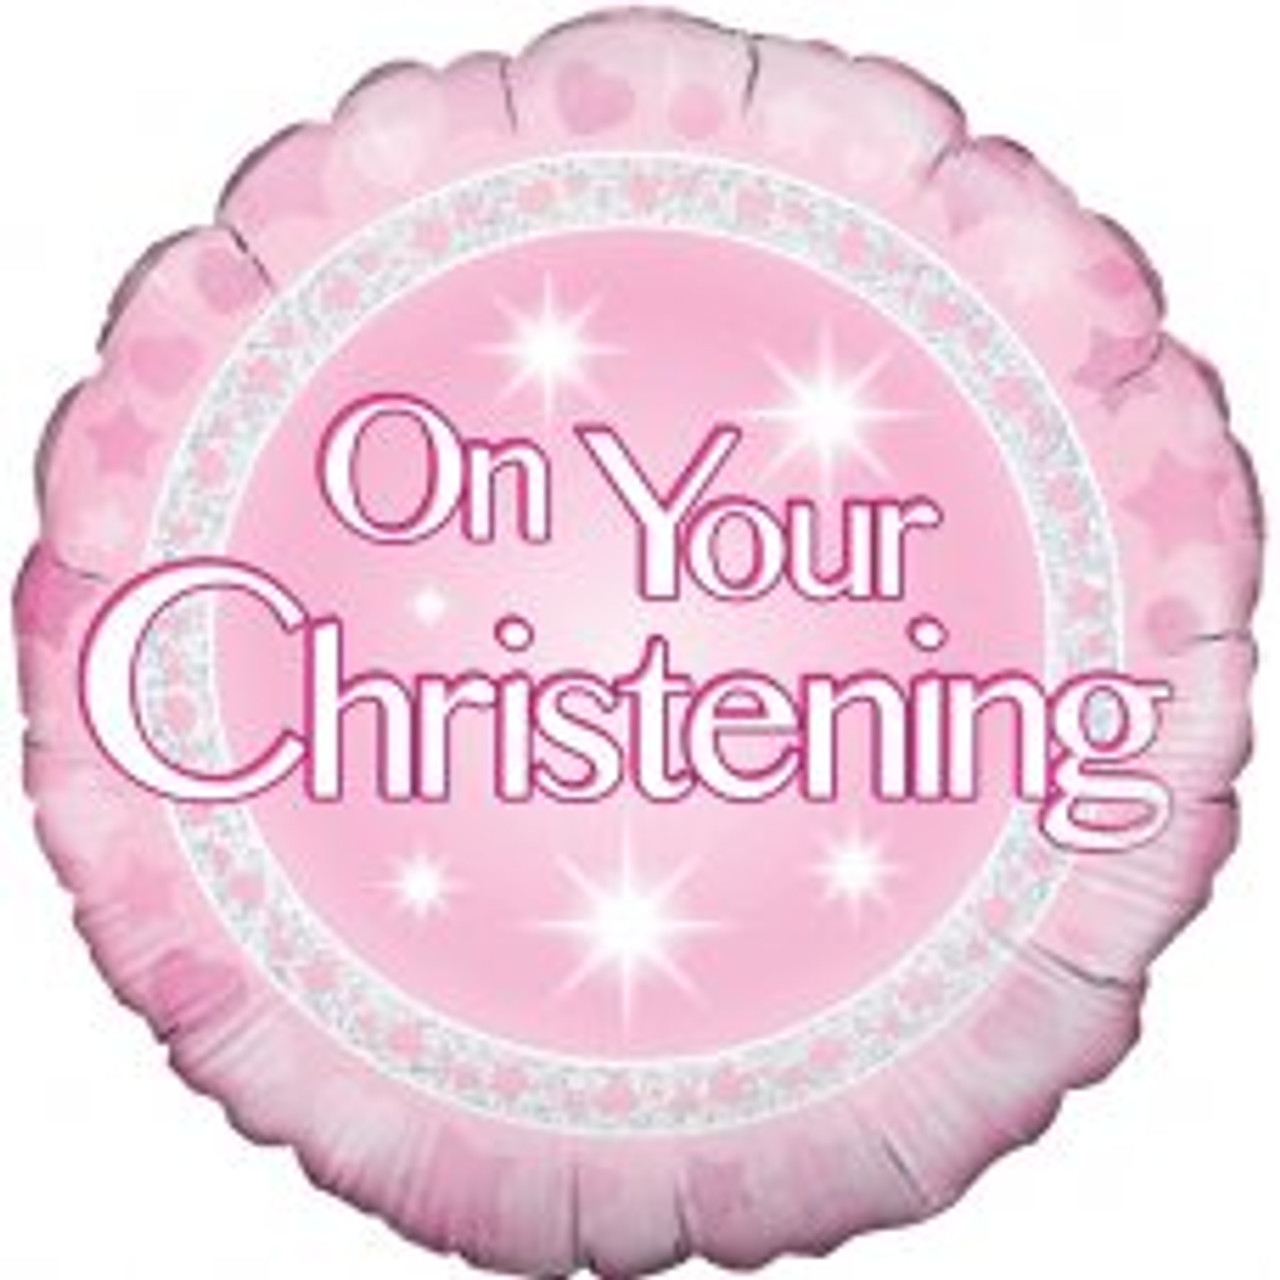 ON YOUR CHRISTENING PINK 45CM FOIL BALLOON